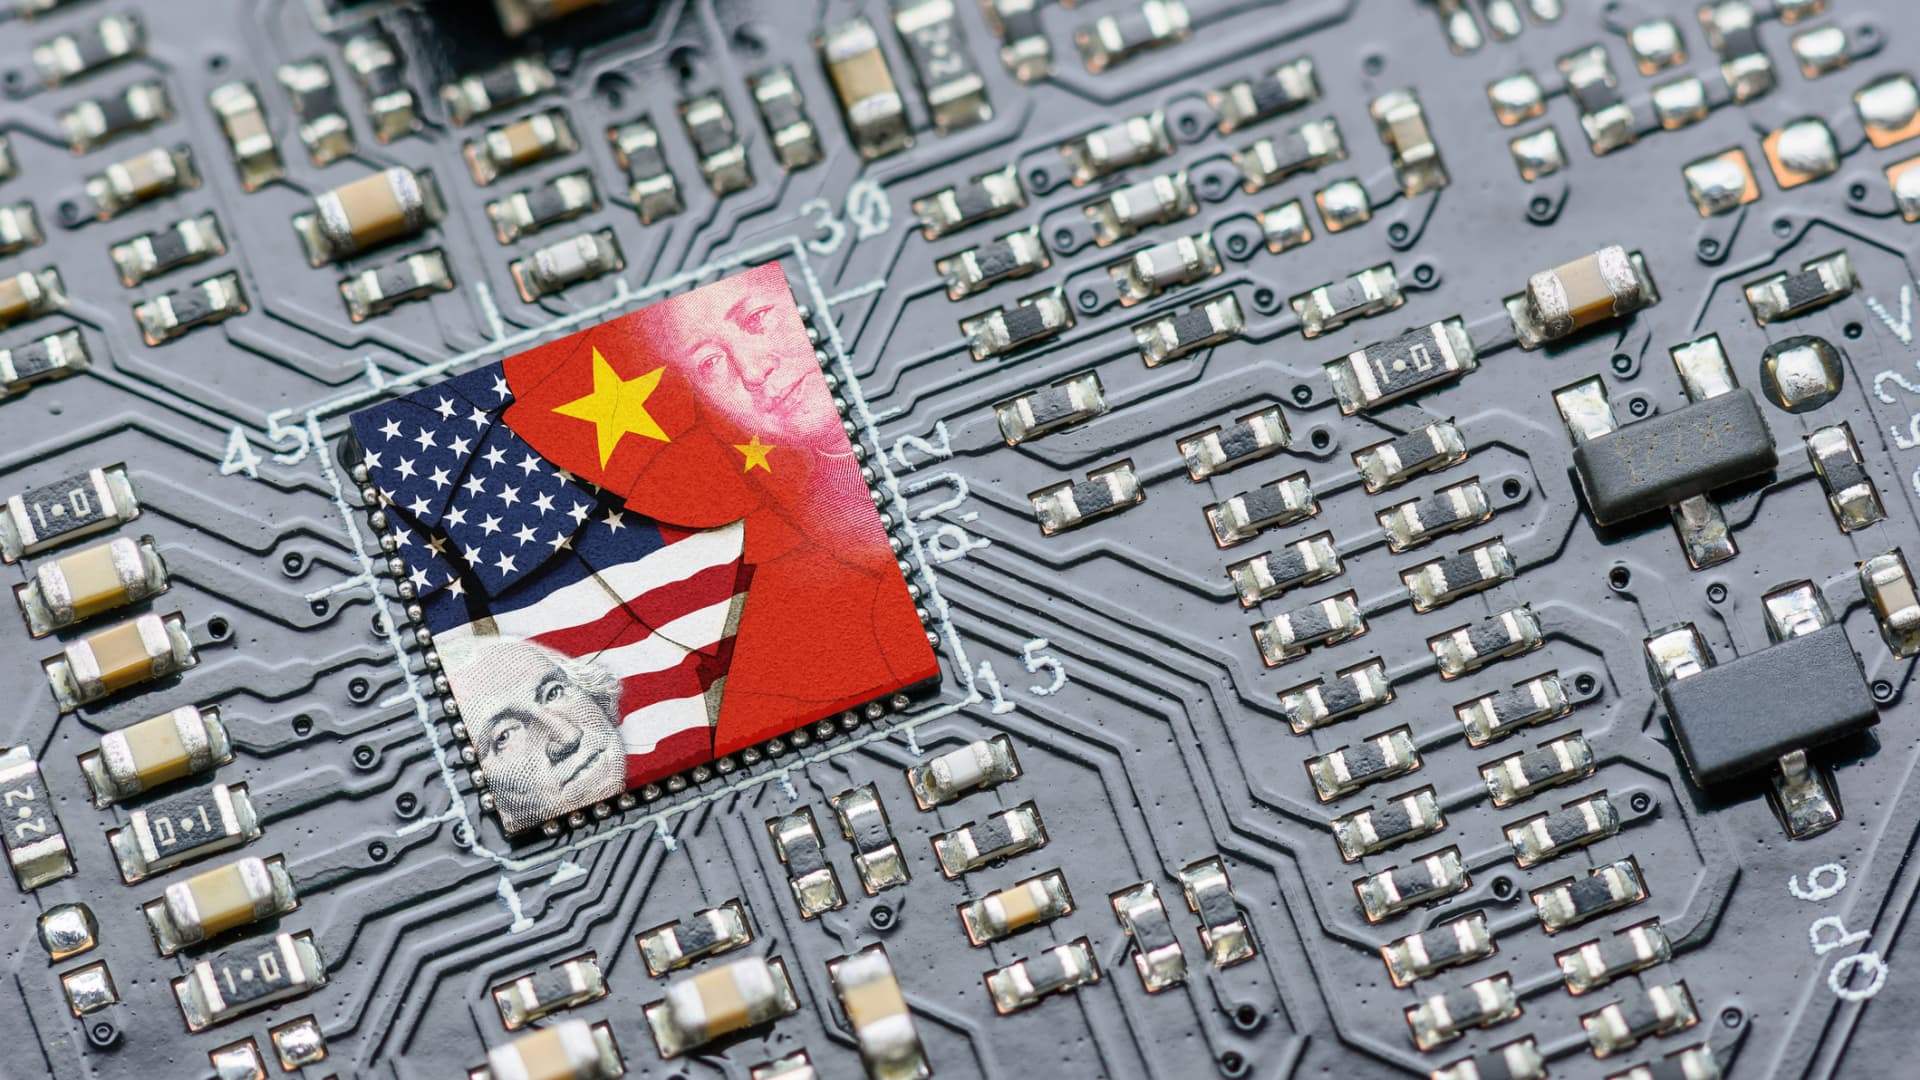 China brings WTO case against U.S. chip export restrictions